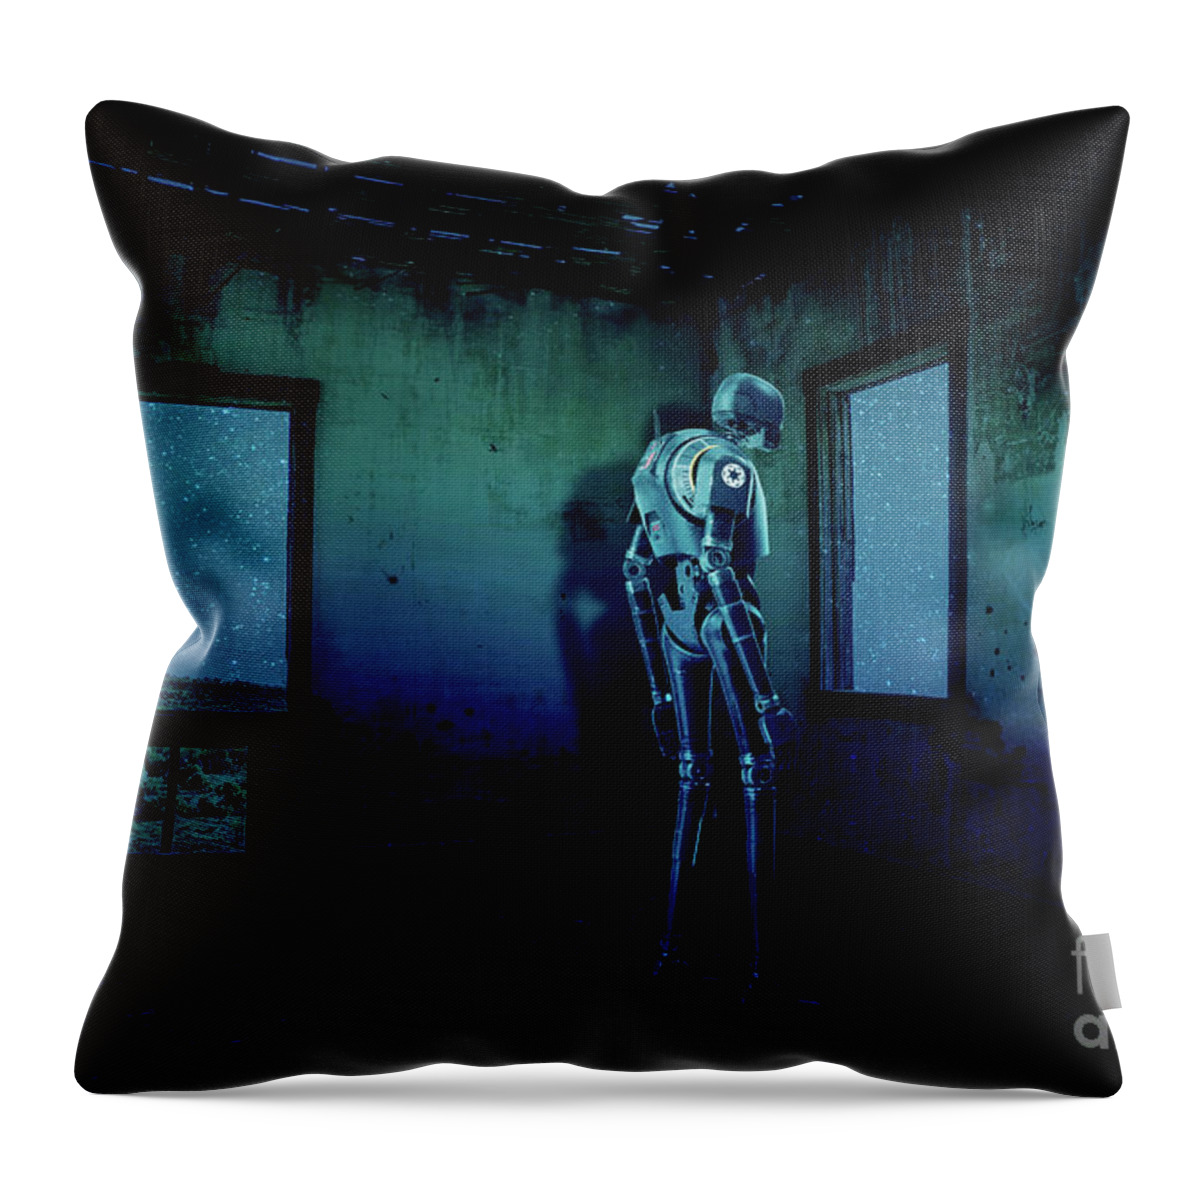 Sci-fi Throw Pillow featuring the digital art Lonely Robot 2 by Edward Fielding